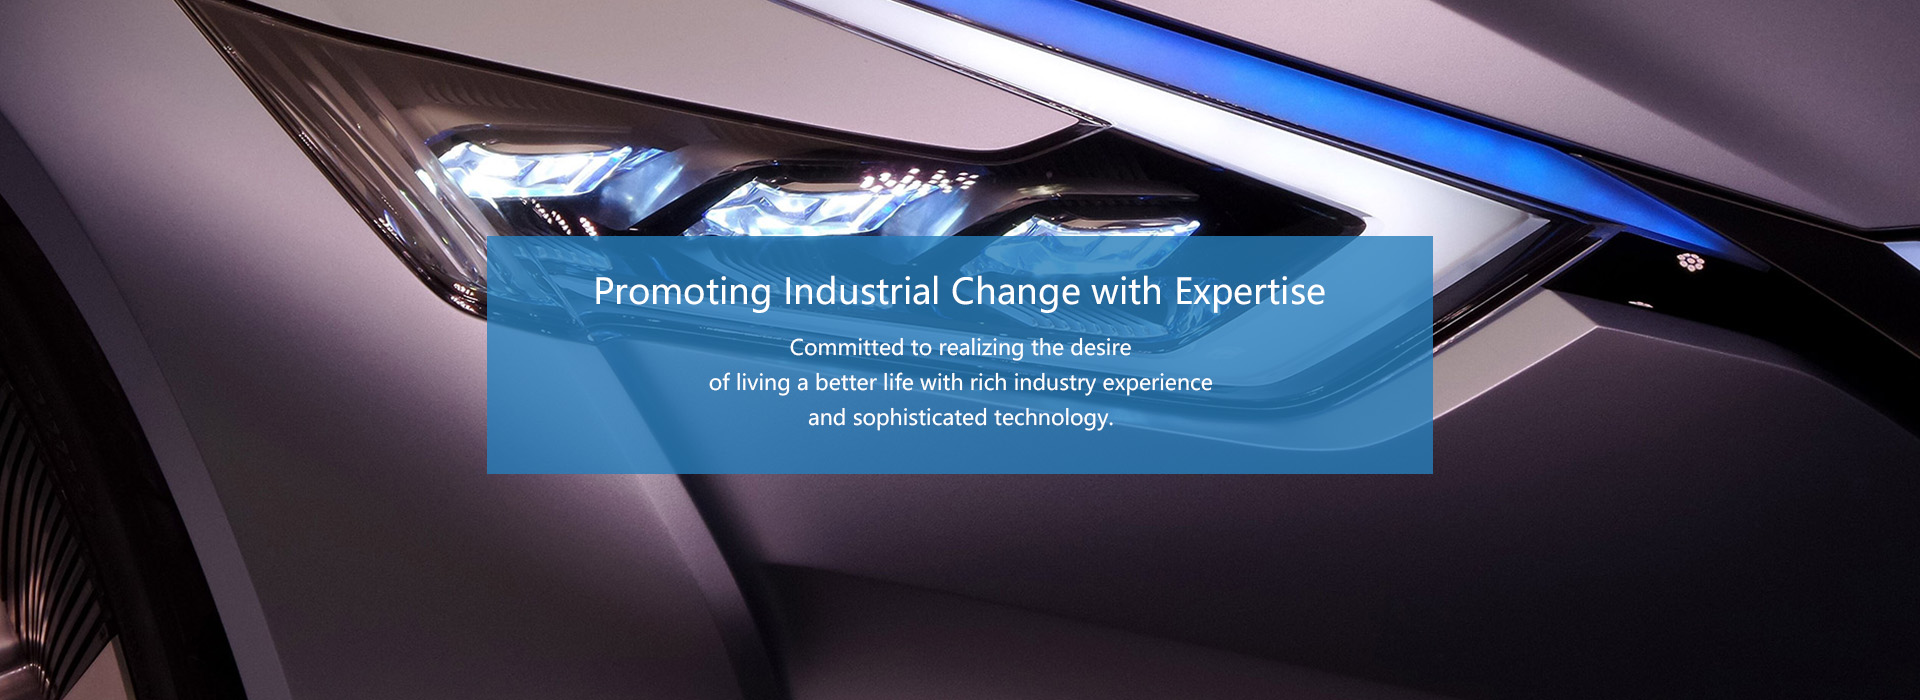 Promoting Industrial Change with Expertise